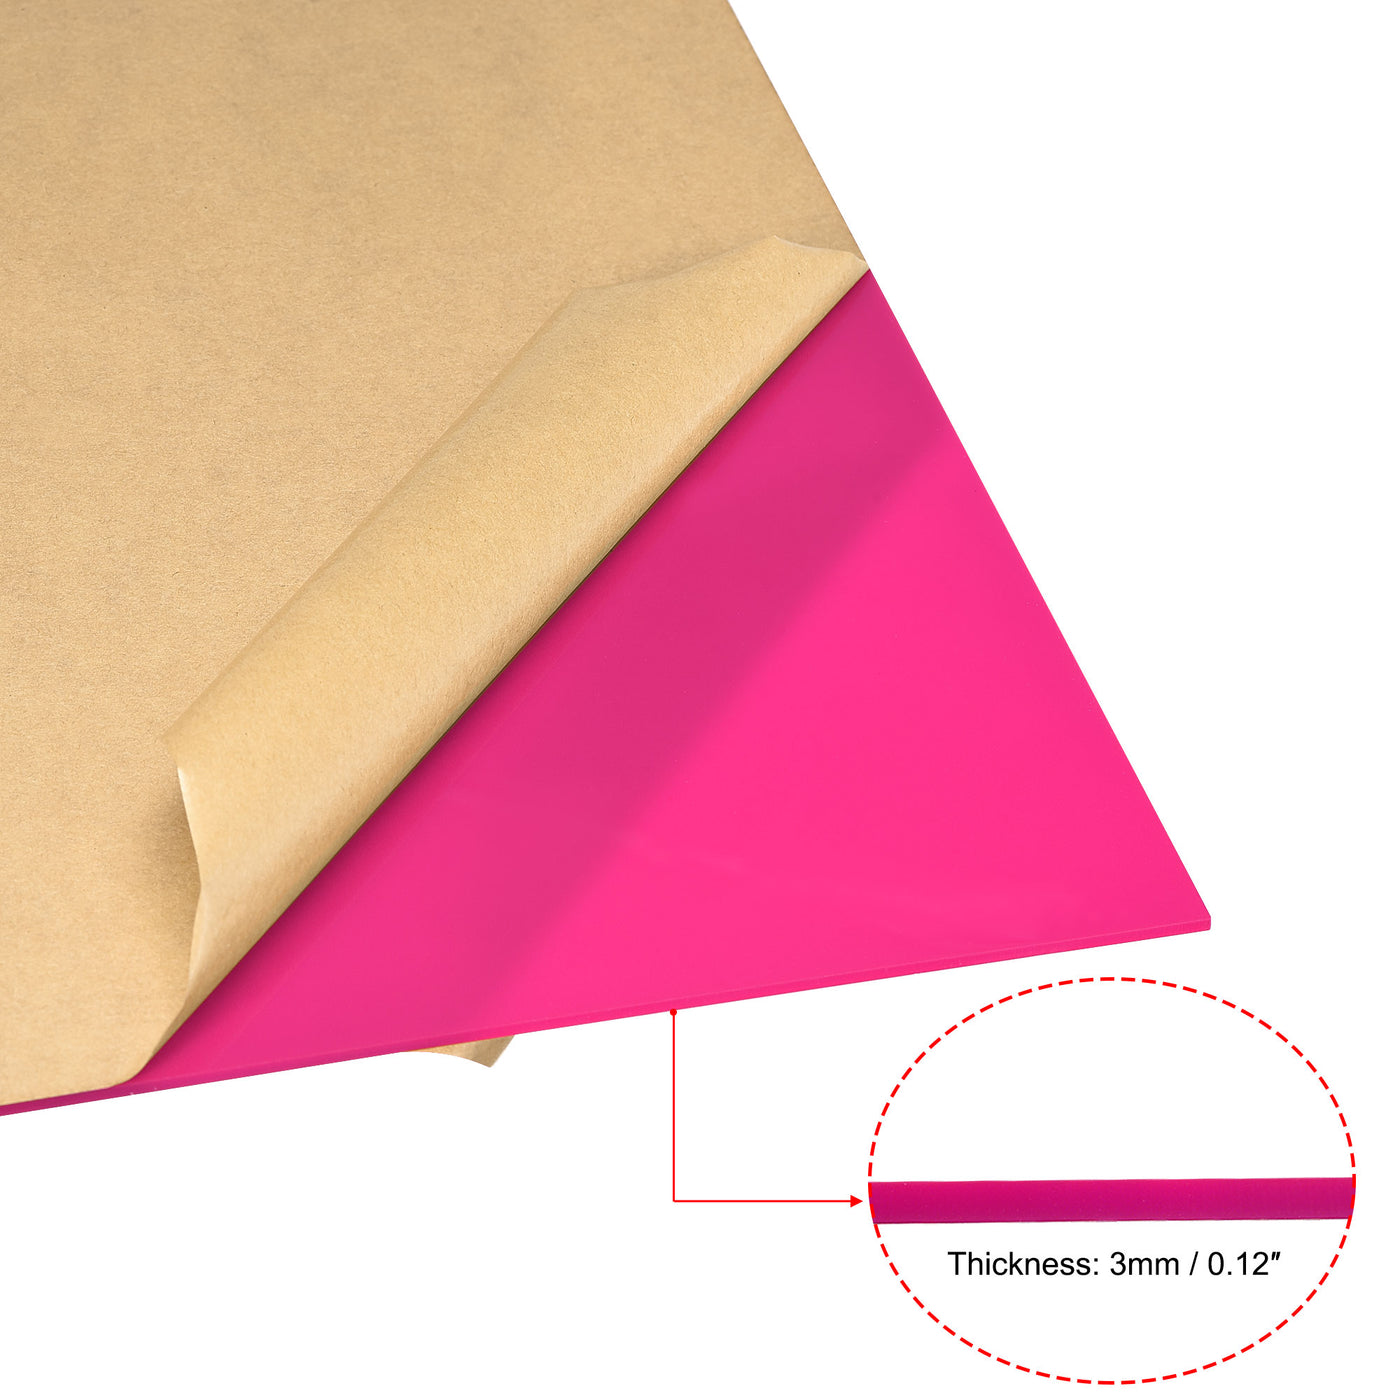 uxcell Uxcell Pink Cast Acrylic Sheet,12" x 12",3mm Thick,Plastic PMMA Acrylic Board